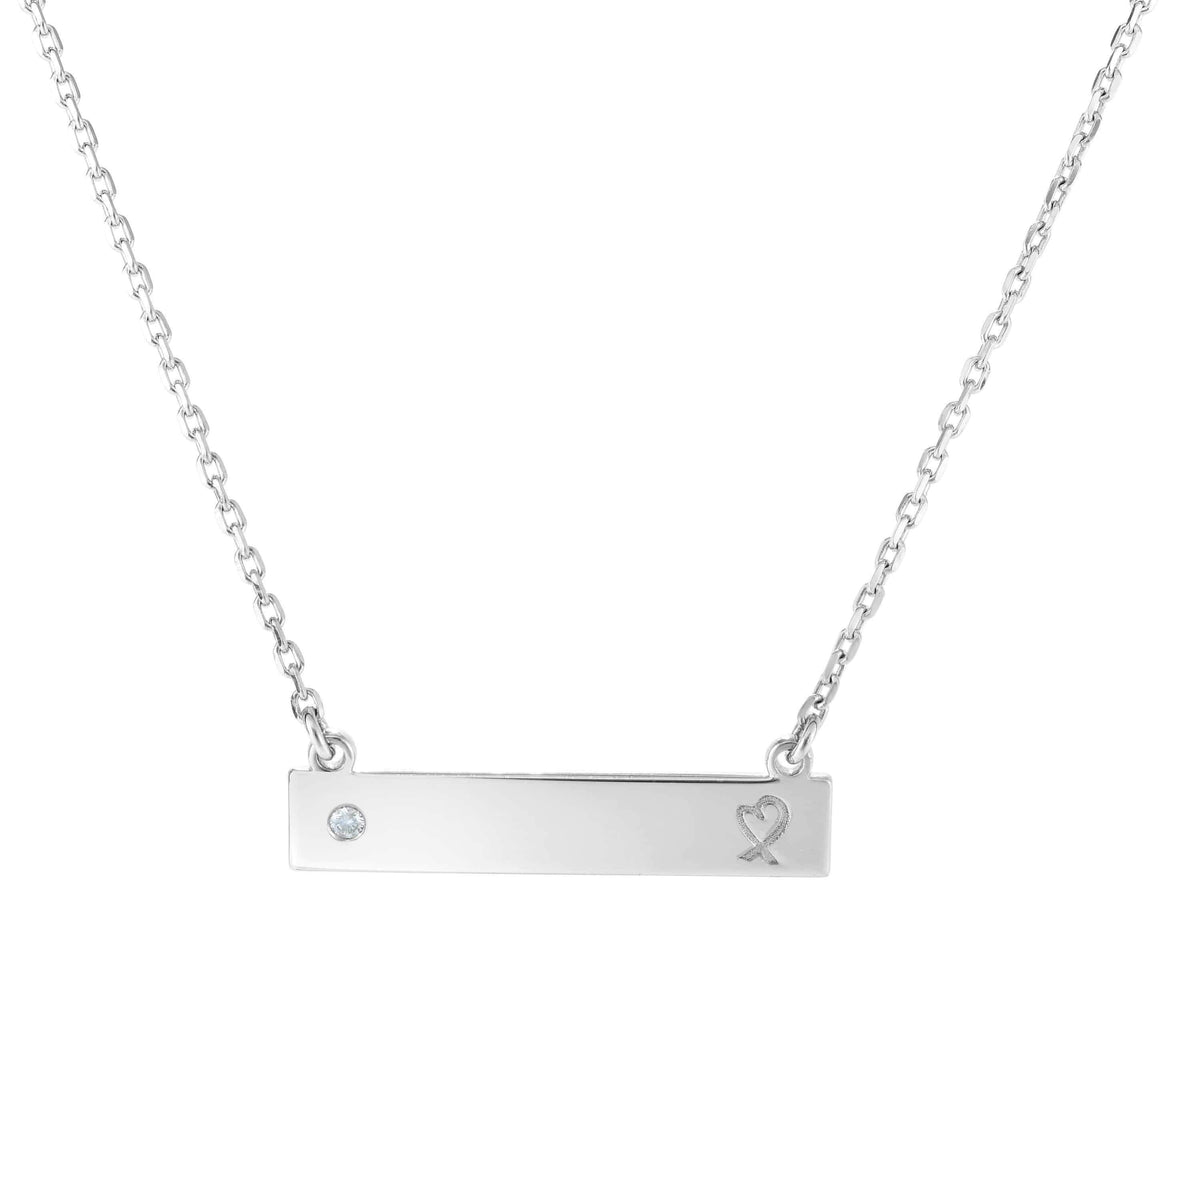 925 Sterling Silver Cubic Zirconia Accent Engraveable Bar Necklace